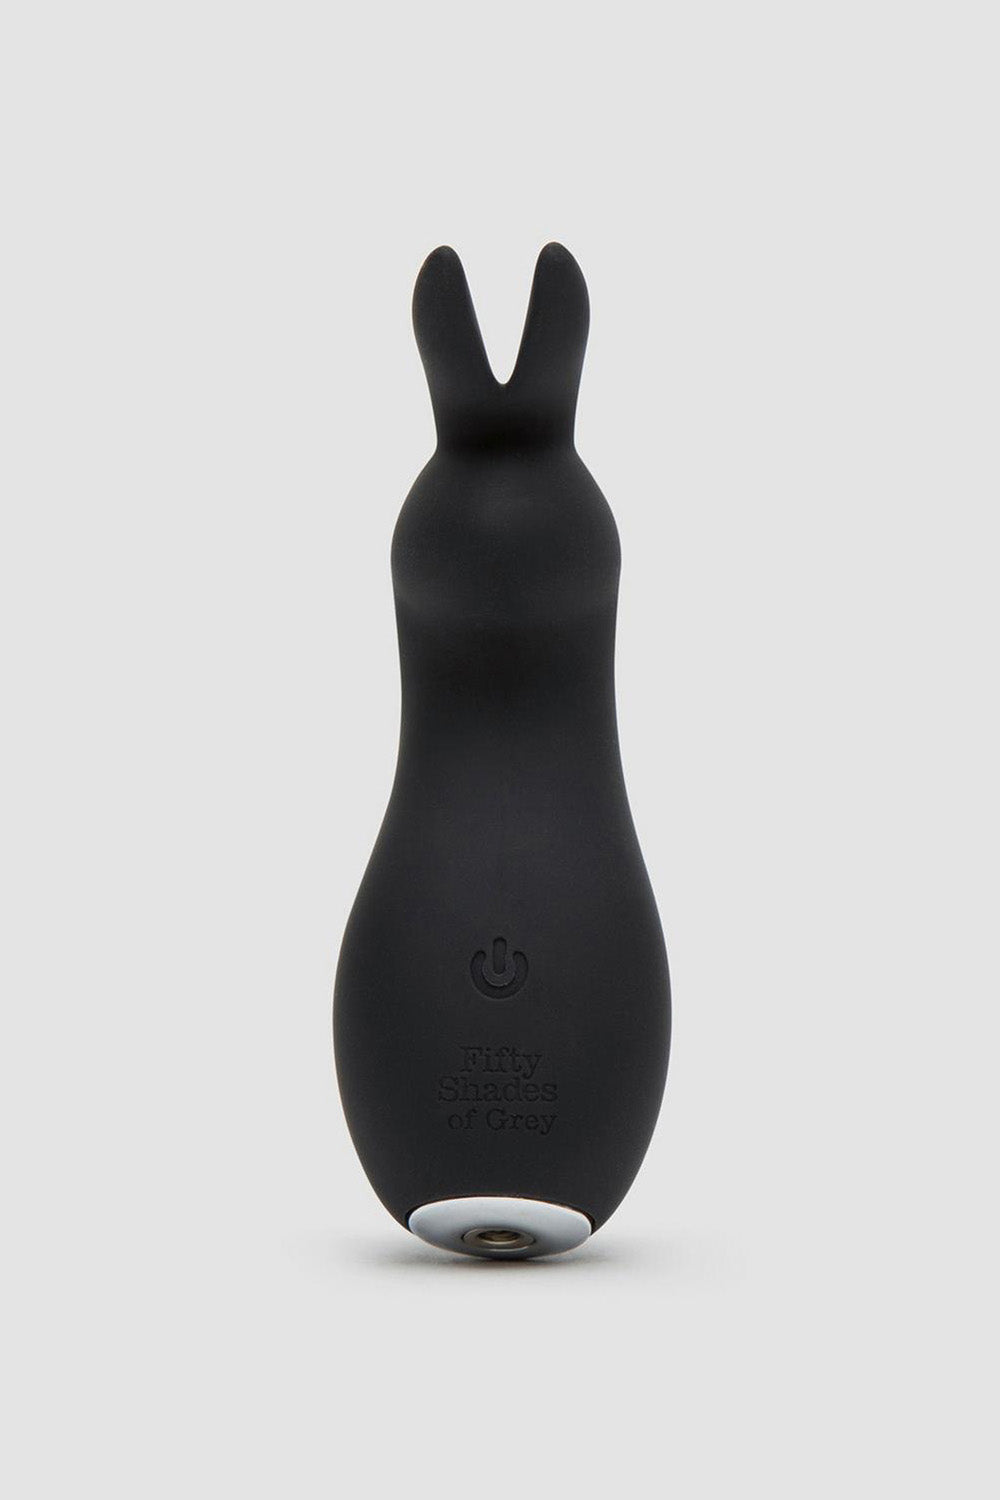 Fifty Shades of Grey Greedy Girl Rechargeable Clitoral Rabbit Vibrator, 3.5 Inches